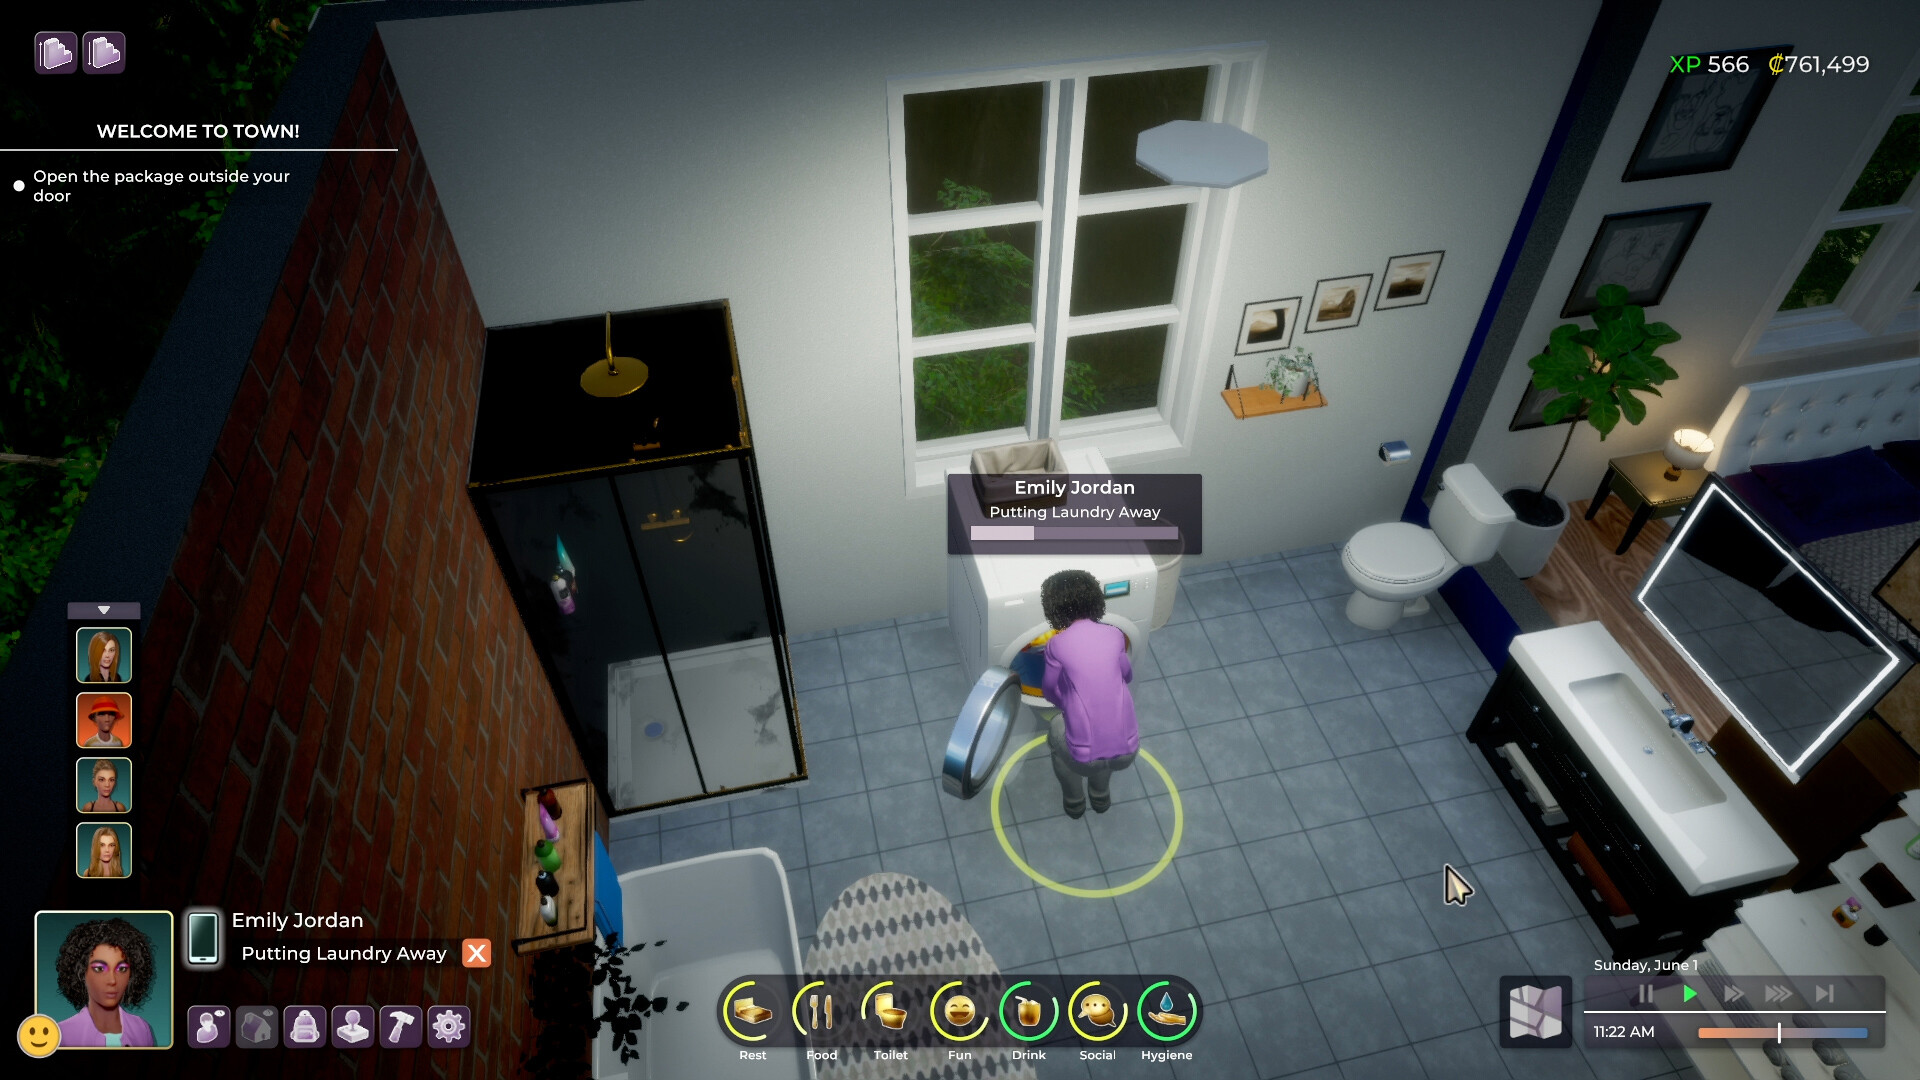 Life by You, the life simulation game unveiled earlier than expected 